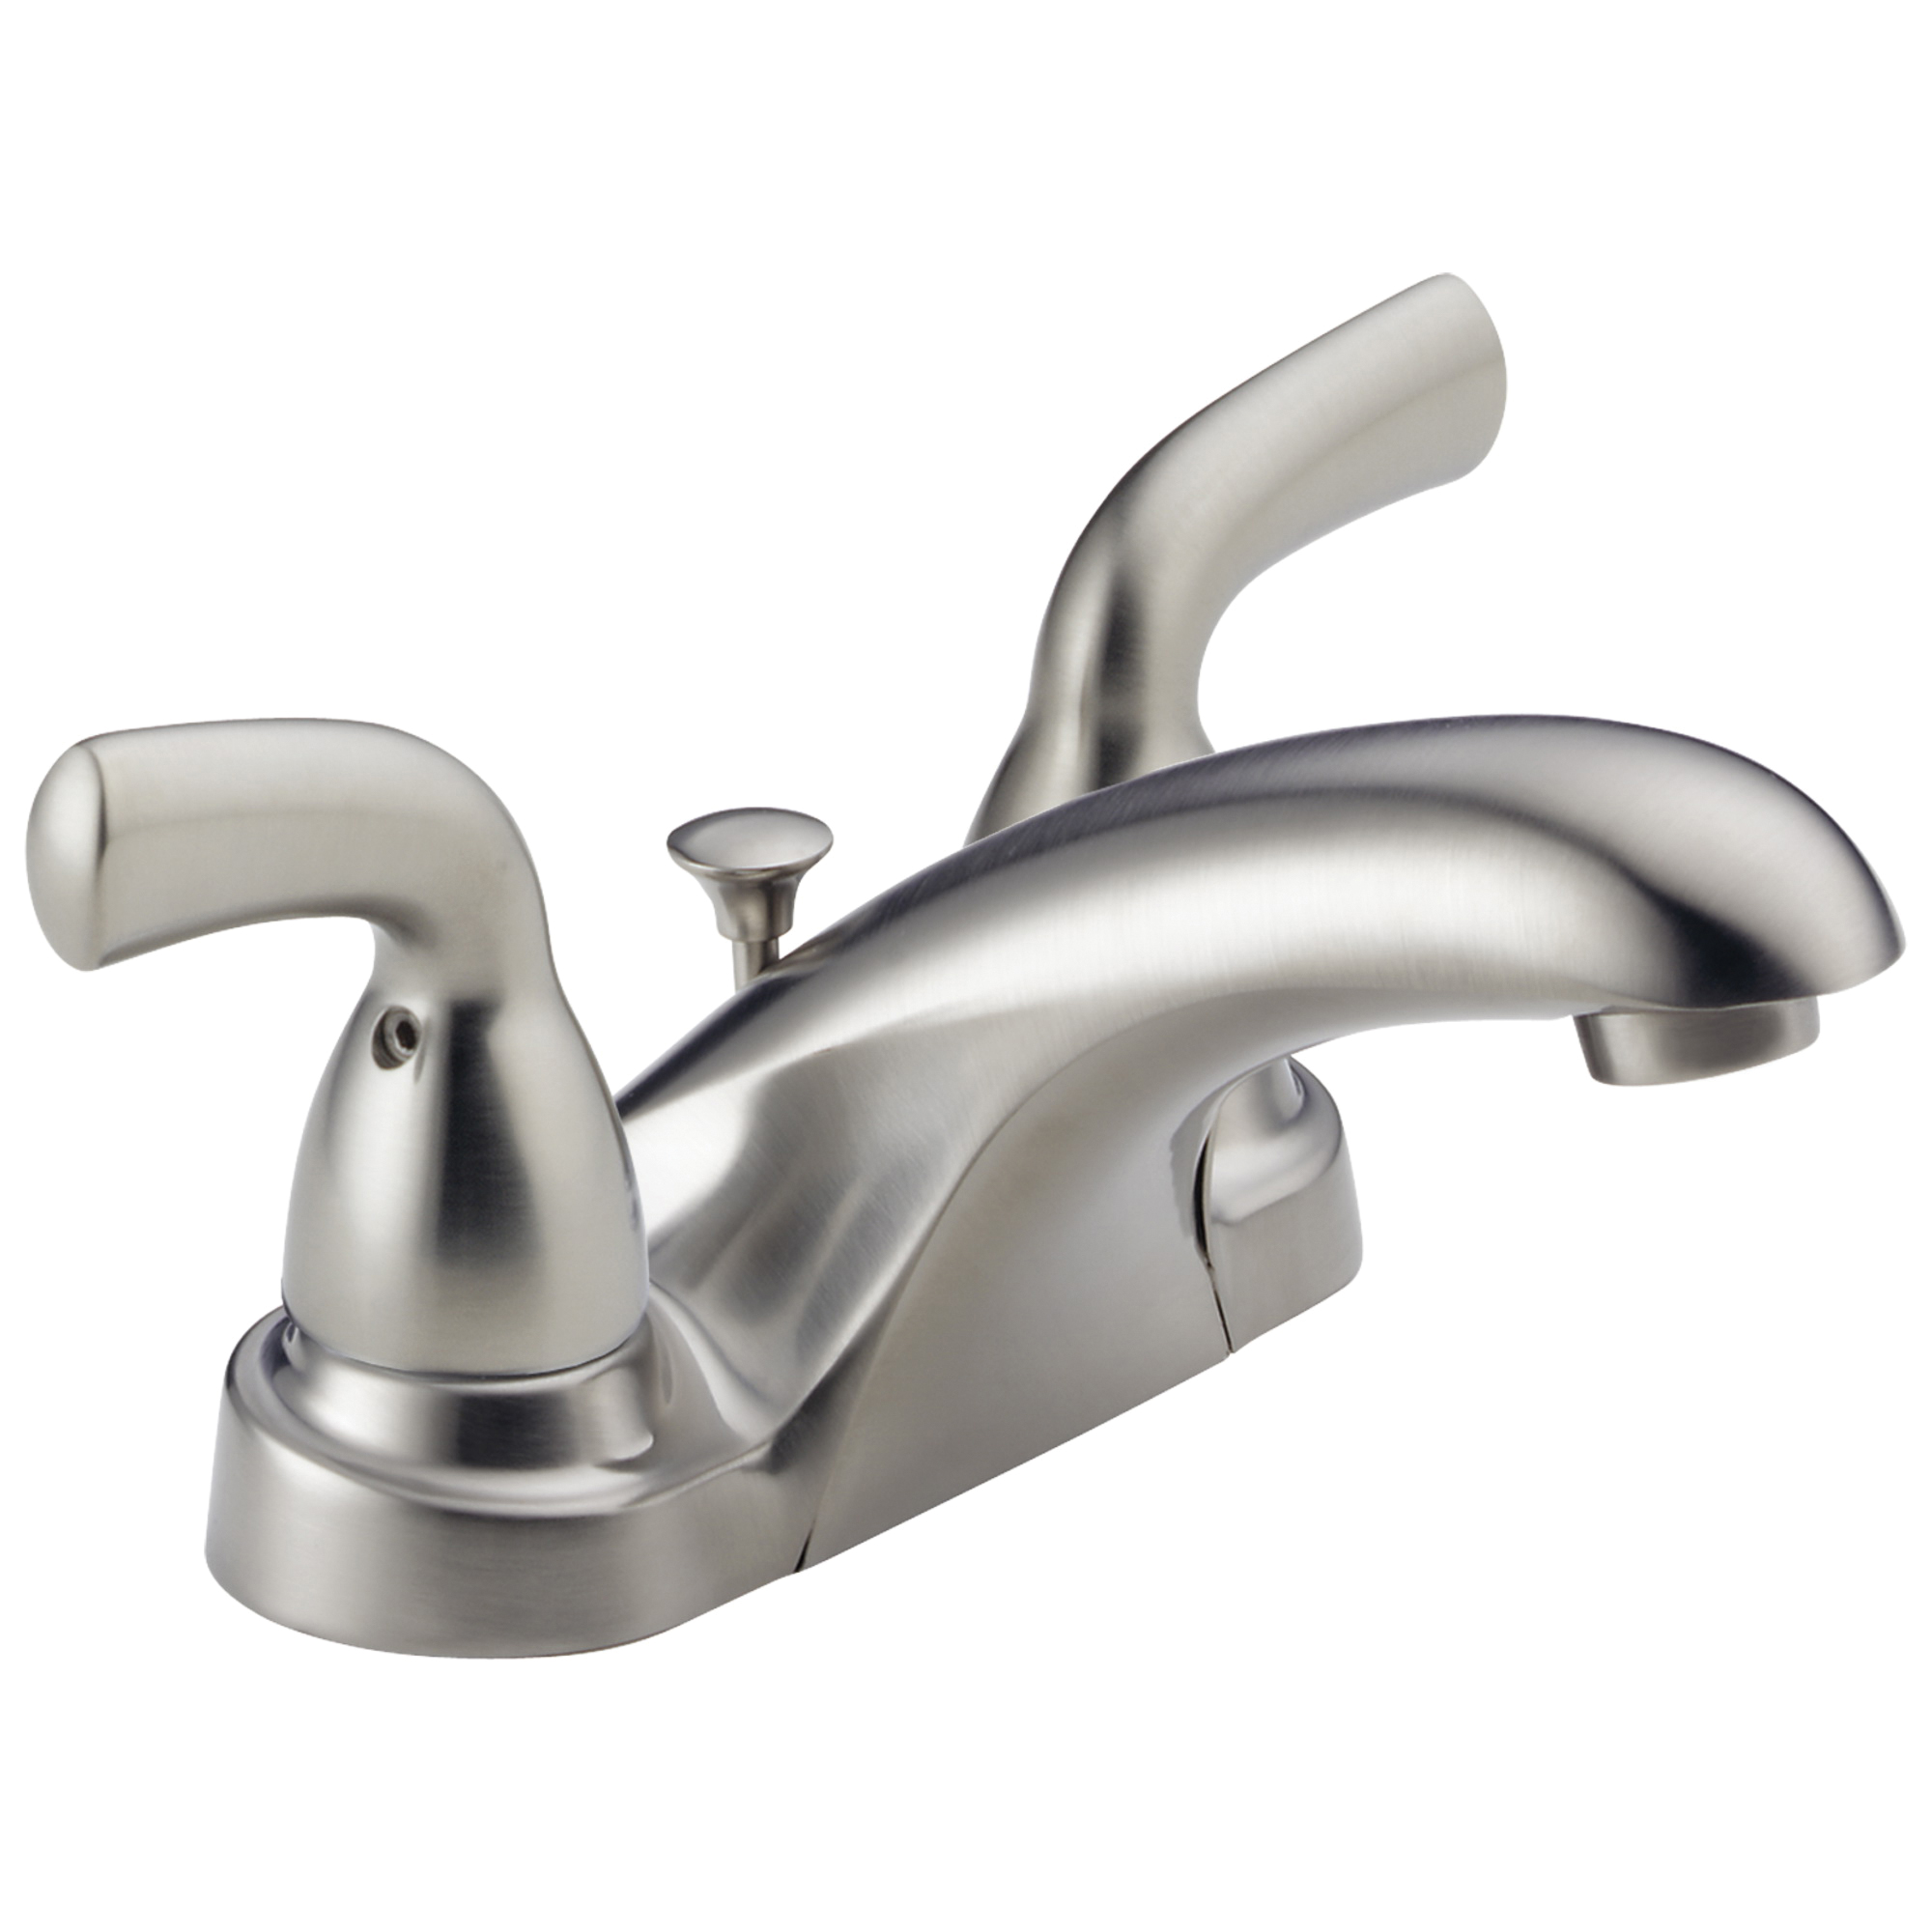 DELTA® B2510LF-SS Centerset Lavatory Faucet, Foundations®, Stainless Steel, 2 Handles, Pop-Up Drain, 1.2 gpm